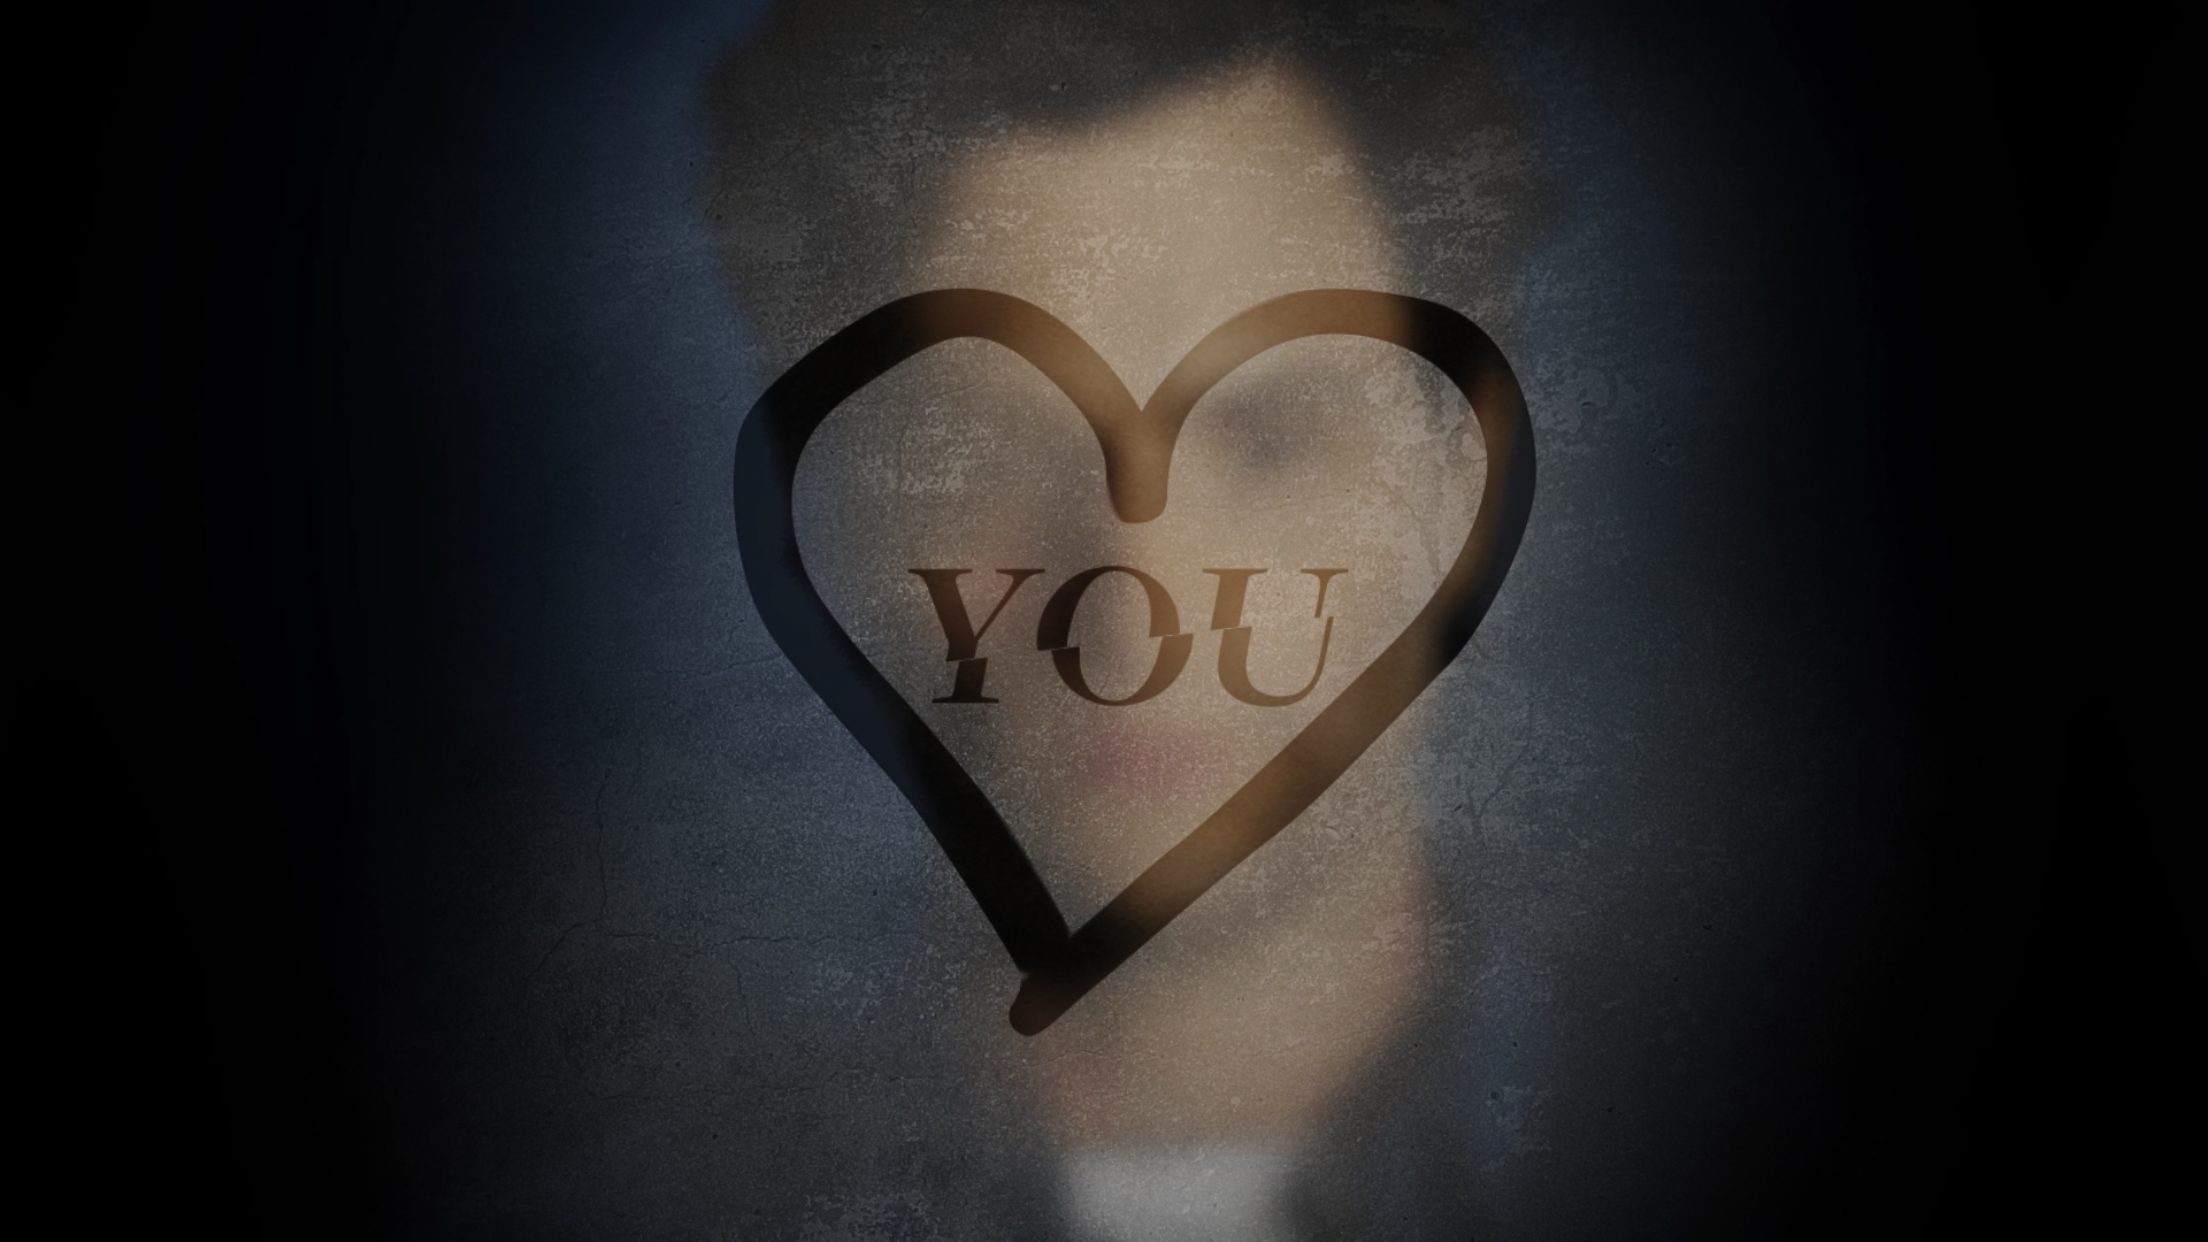 Screenshot of the show "You" during the trailer